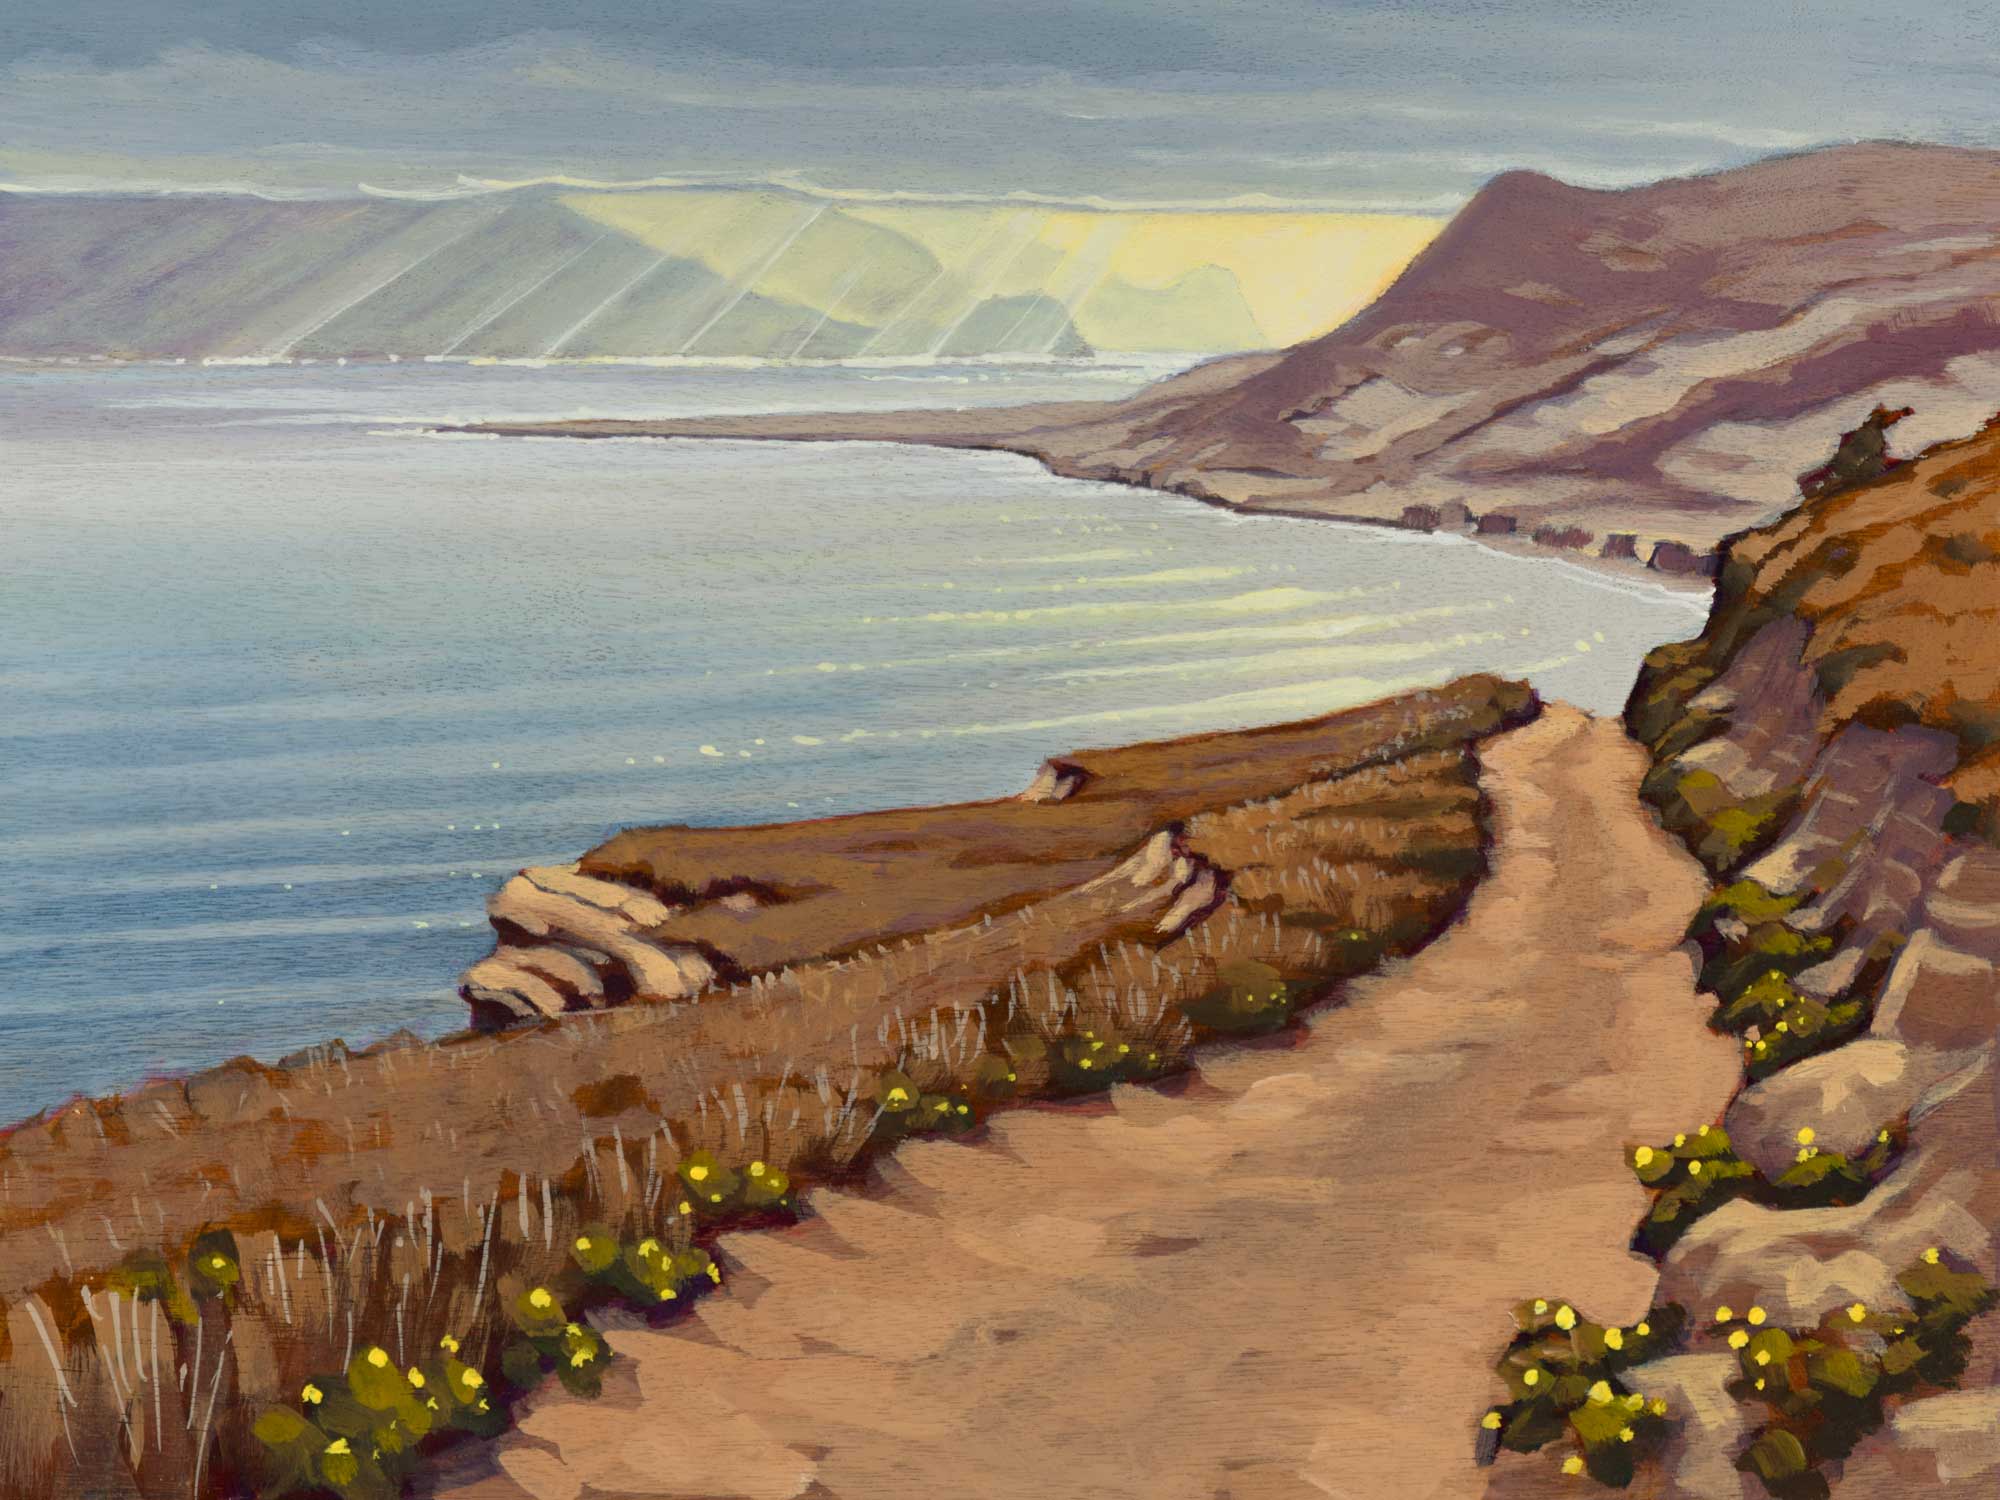 Plein air artwork from the trail to Skunk Point on Santa Rosa Island off the coast of southern California